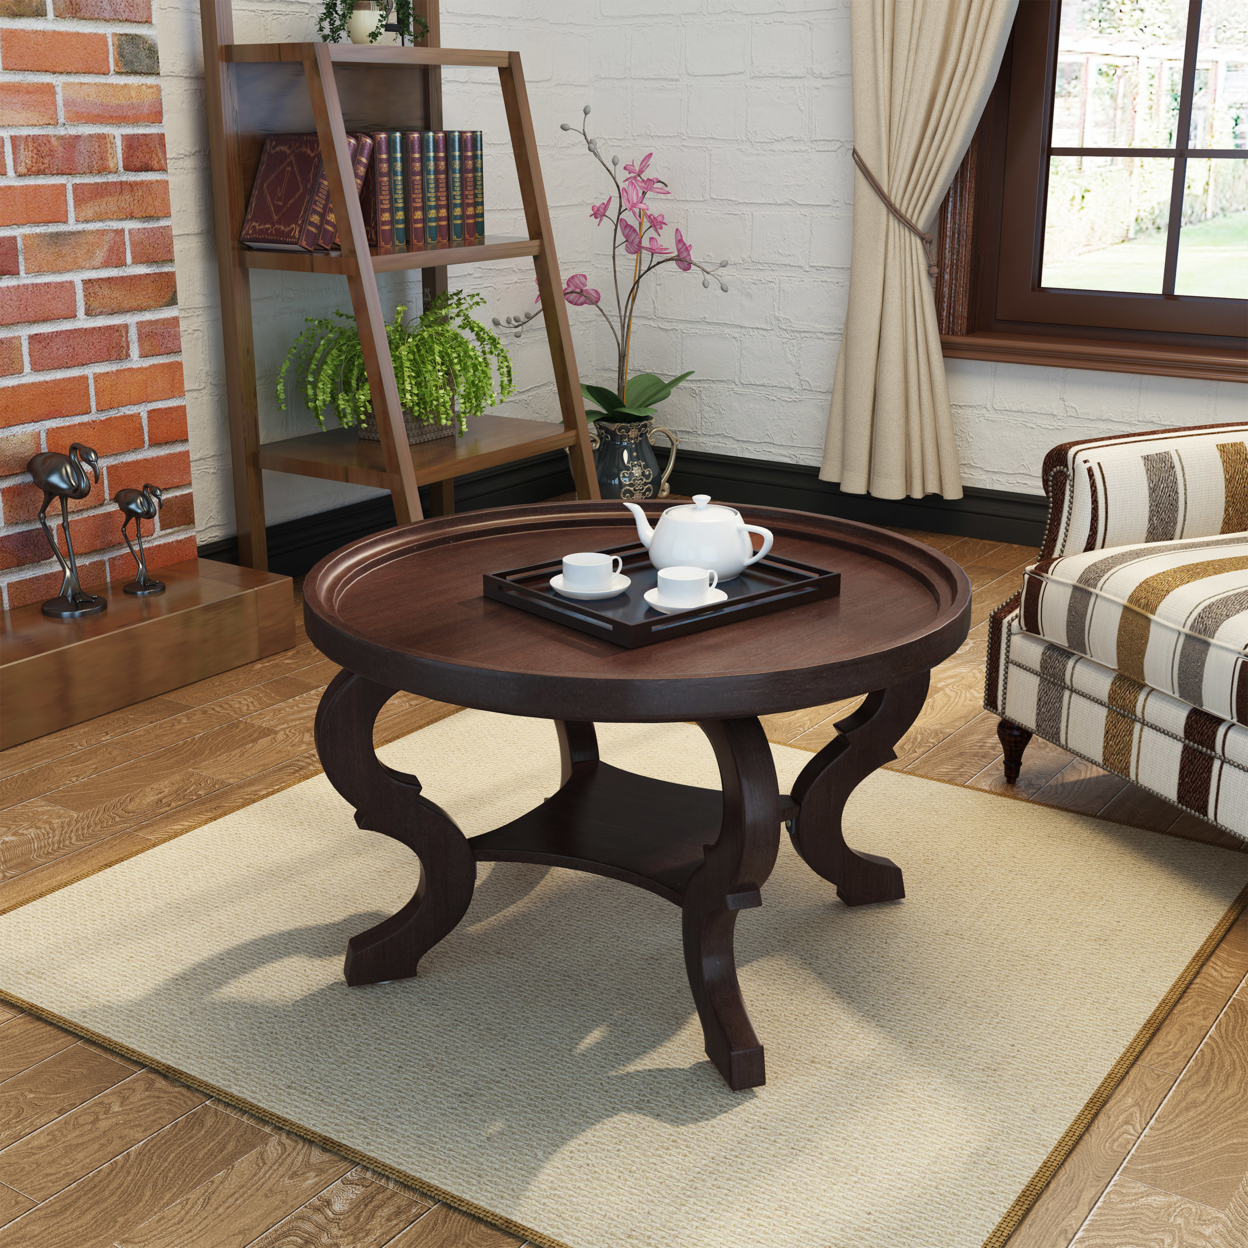 Alteri Finished Faux Wood Circular Coffee Table - Natural